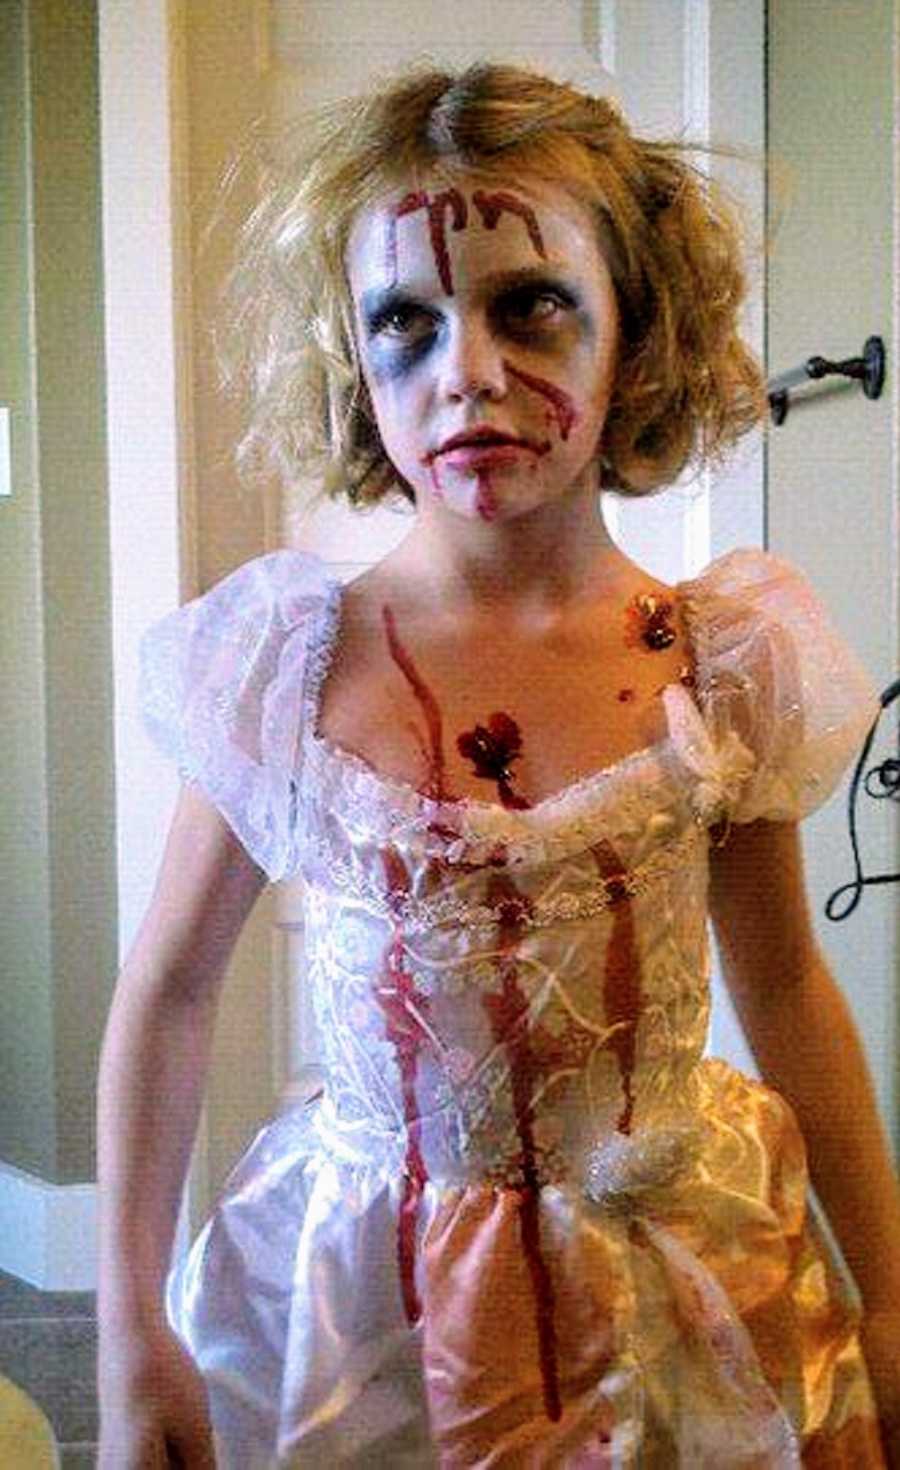 Little girl in white dress stands with fake blood all over her for Halloween